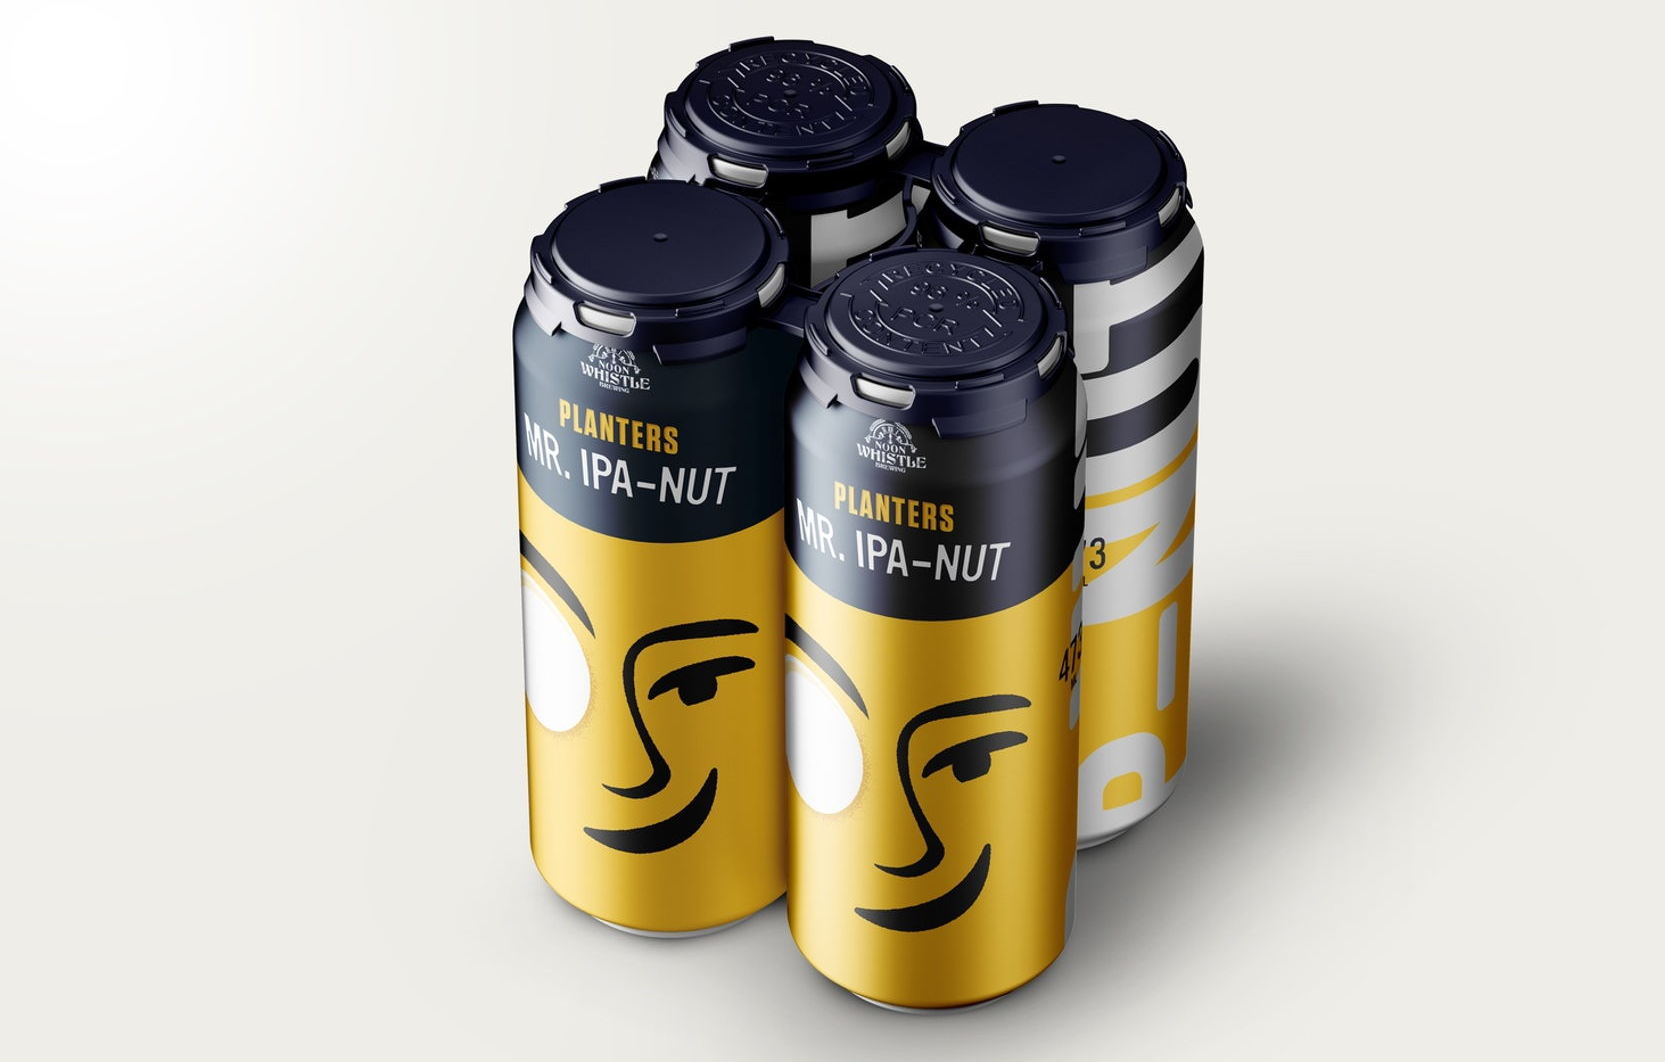 Planters Steps Into the Wonderful World of Beer With Mr. IPA-Nut | Dieline